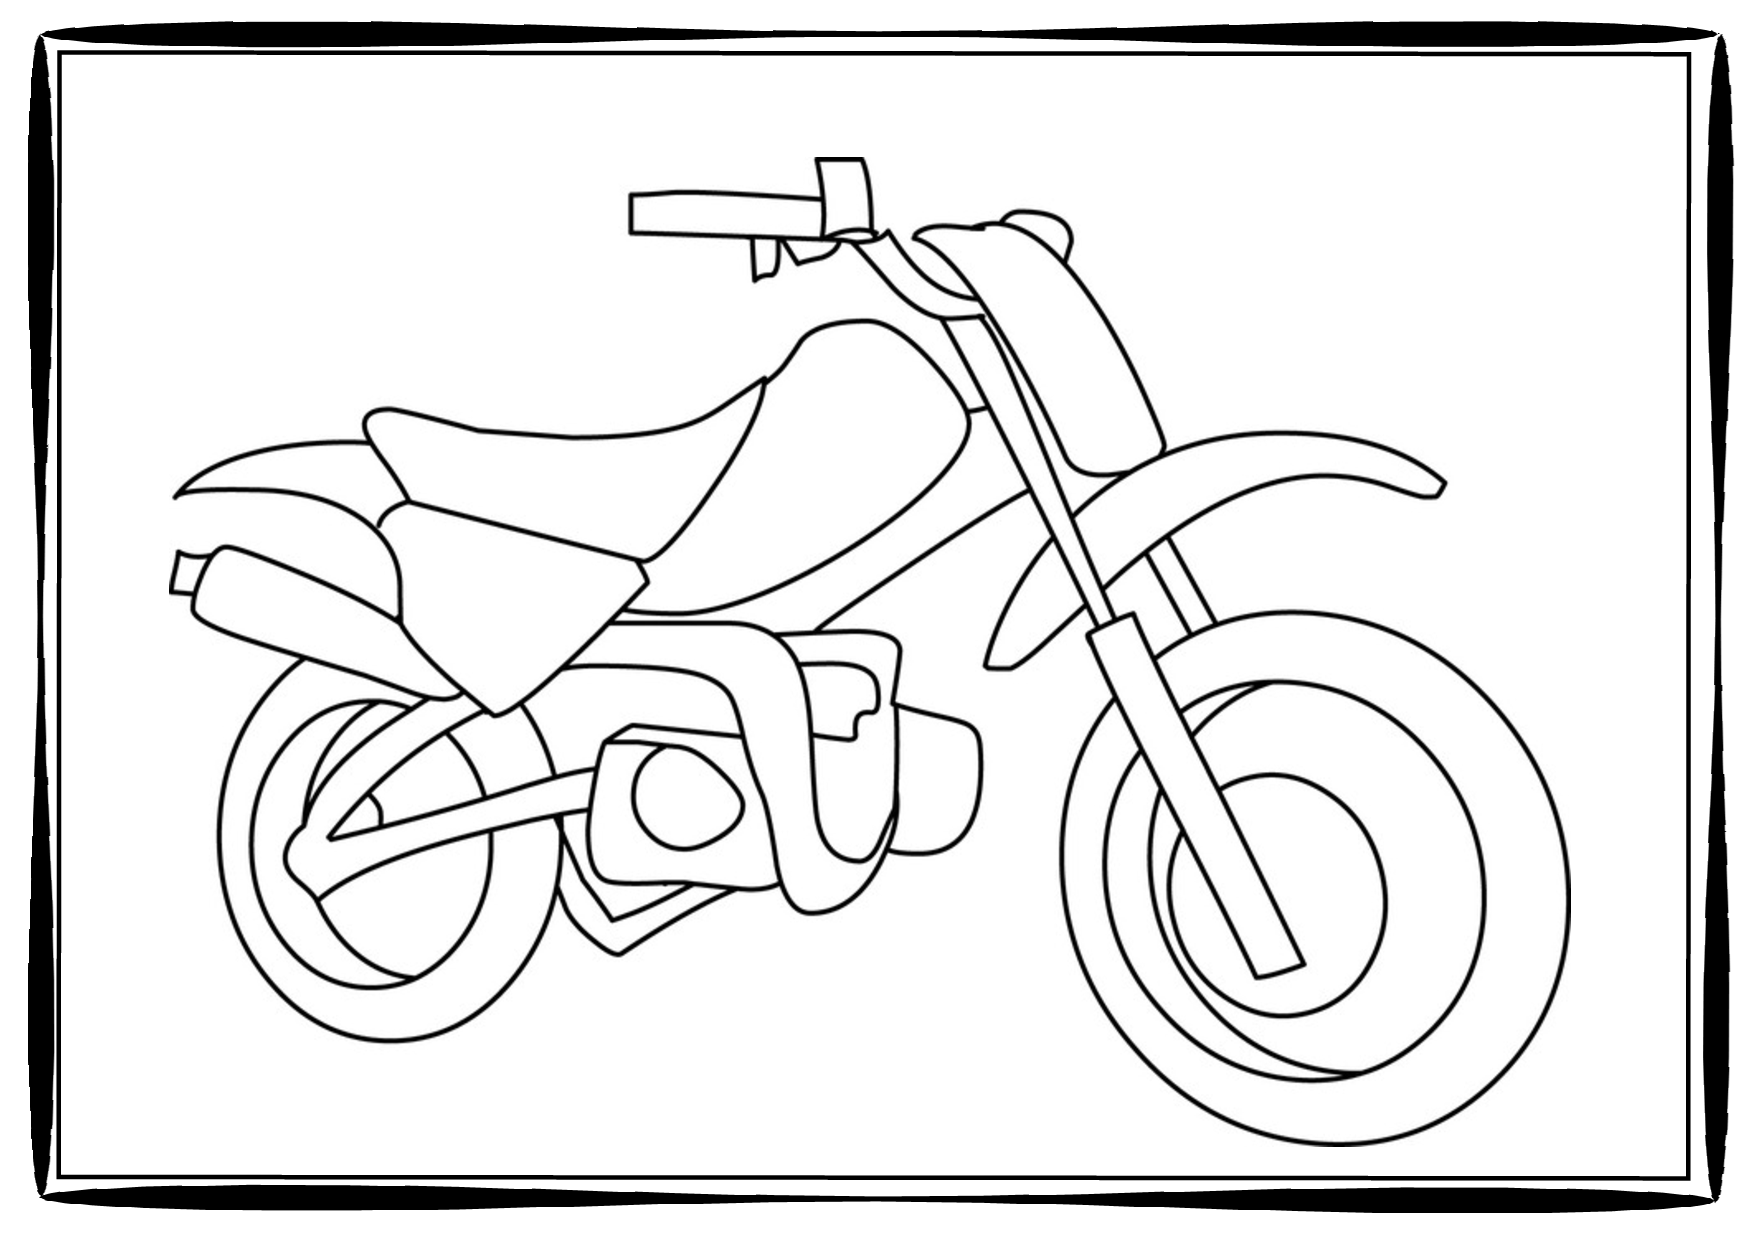  Dirt Bike Coloring Pages | Coloring pages for Boys | #13